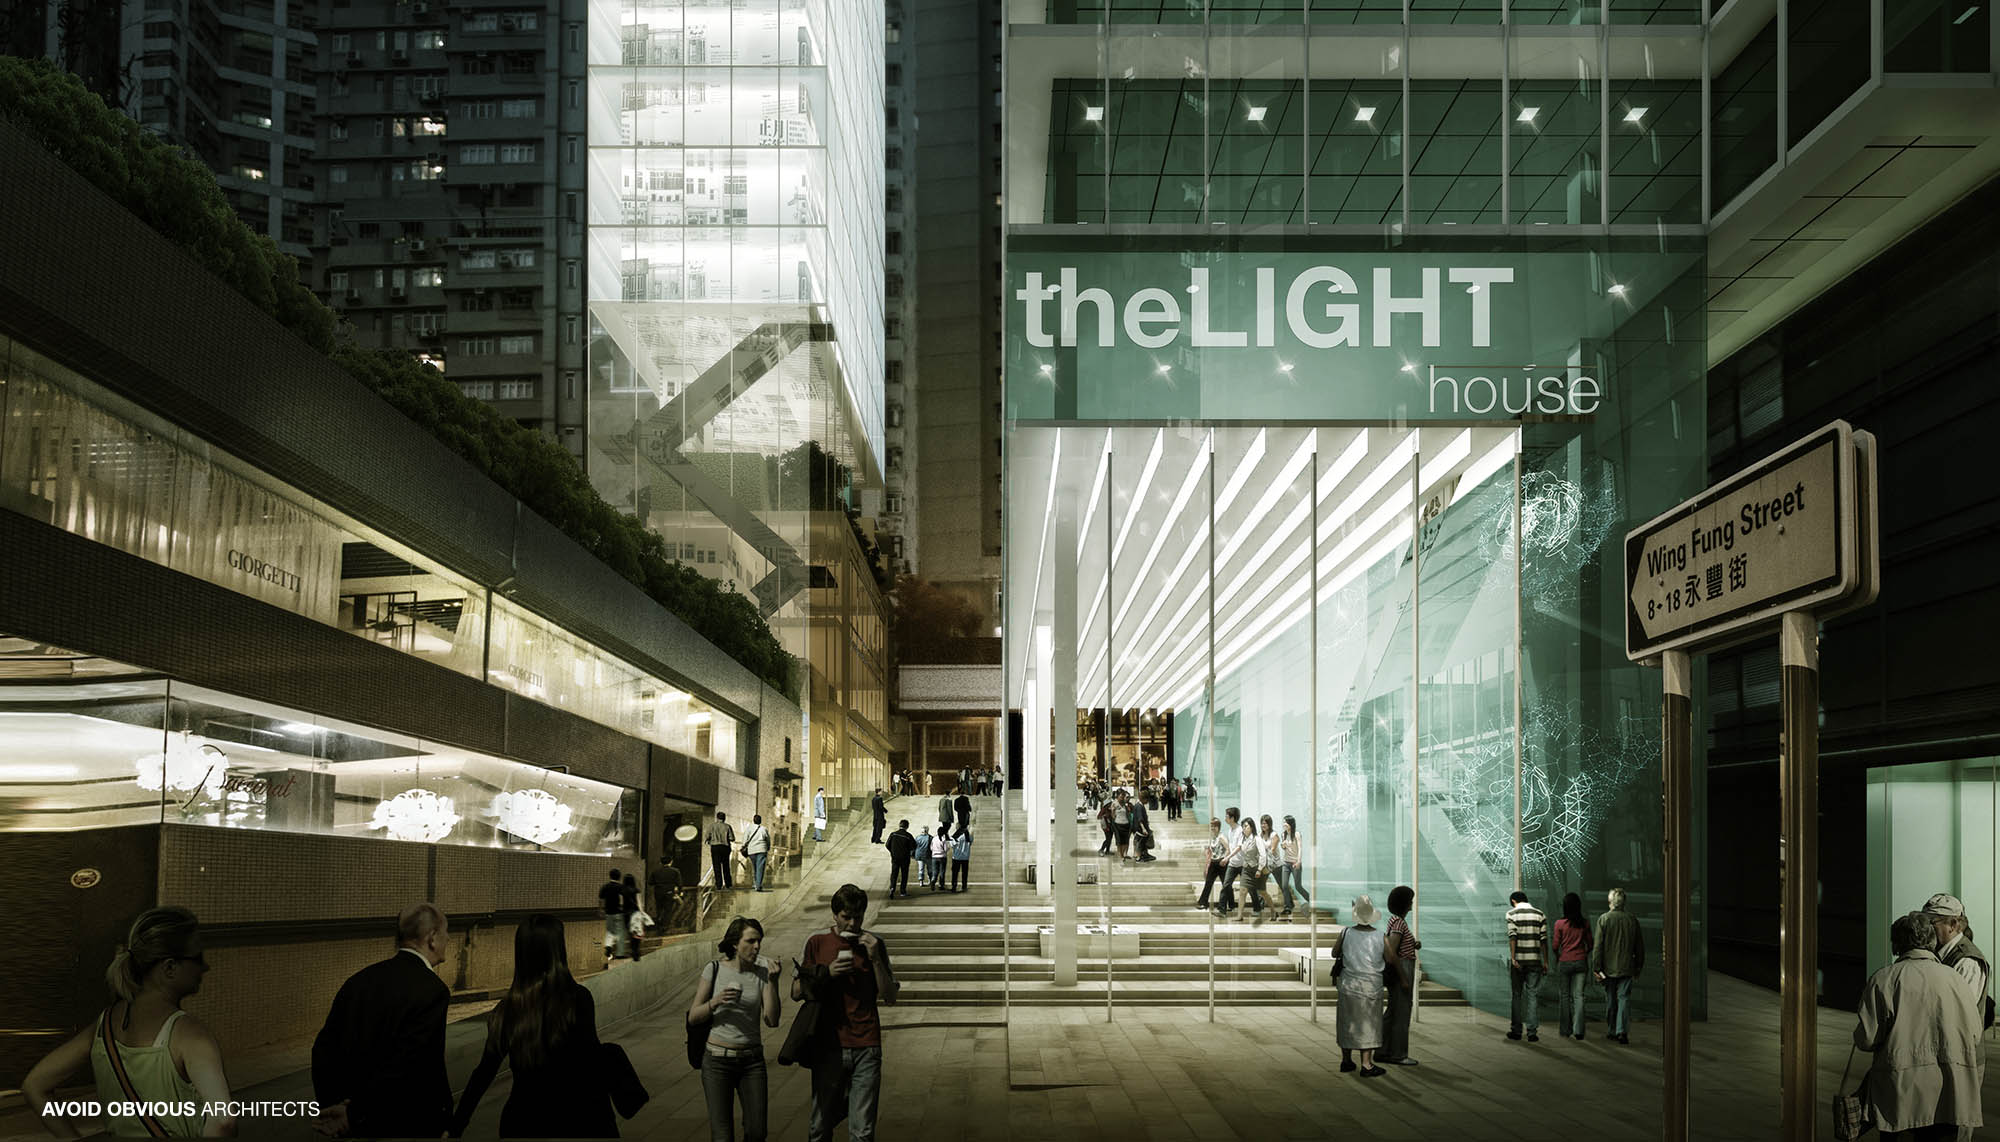 urban planning, movable wall, screen, folding, foldable, star, moon, light, facade, sustainable, swire, hong kong, development, street, context, history, wing fung, avoid obvious, architects, architecture, green, theatre, pixel